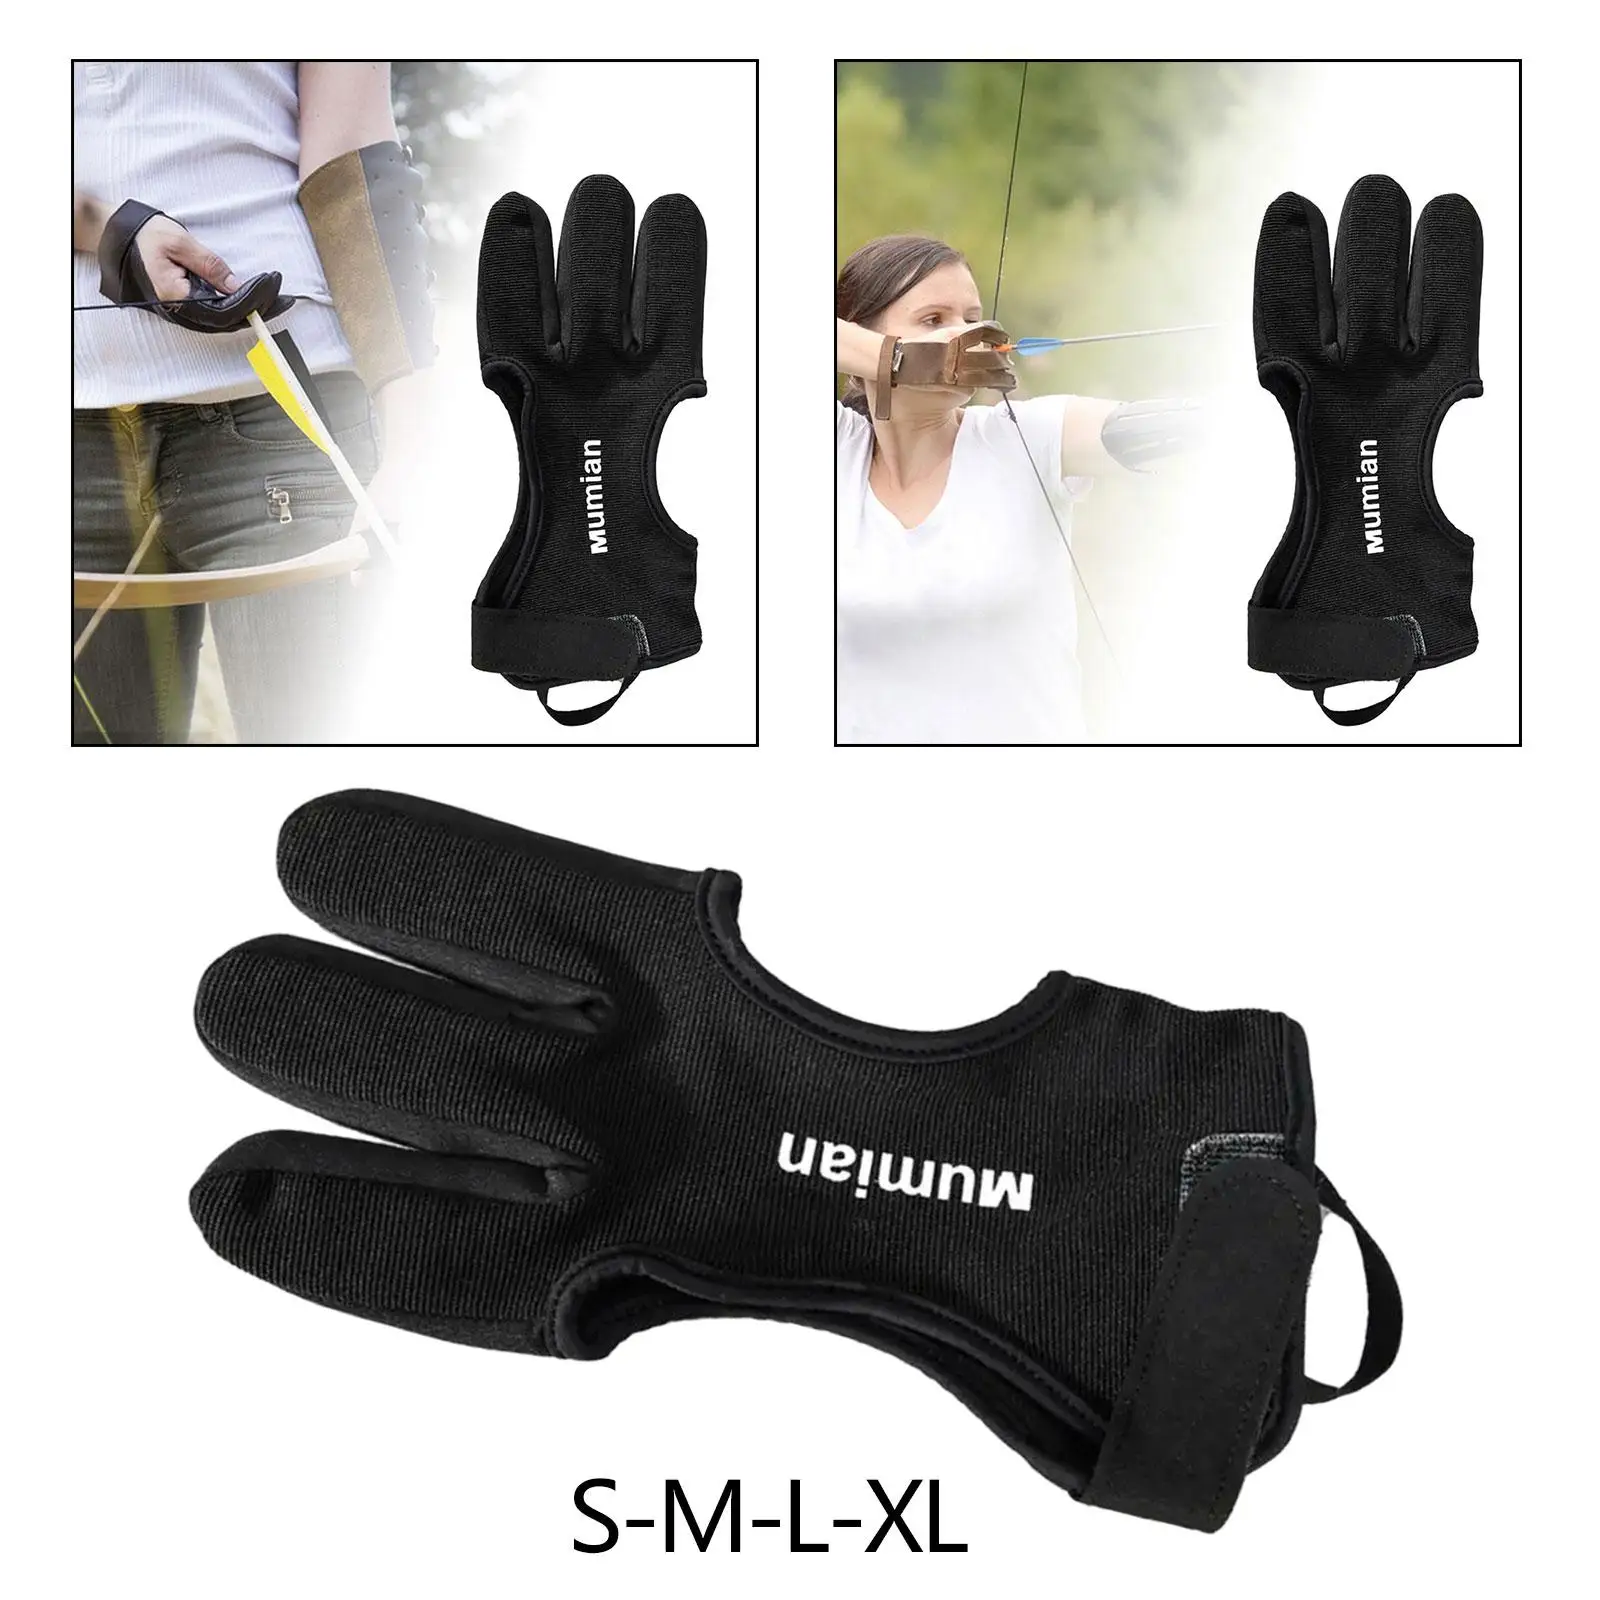 Archery Glove Finger Protector for Left and Right Hand Protective Glove Archery